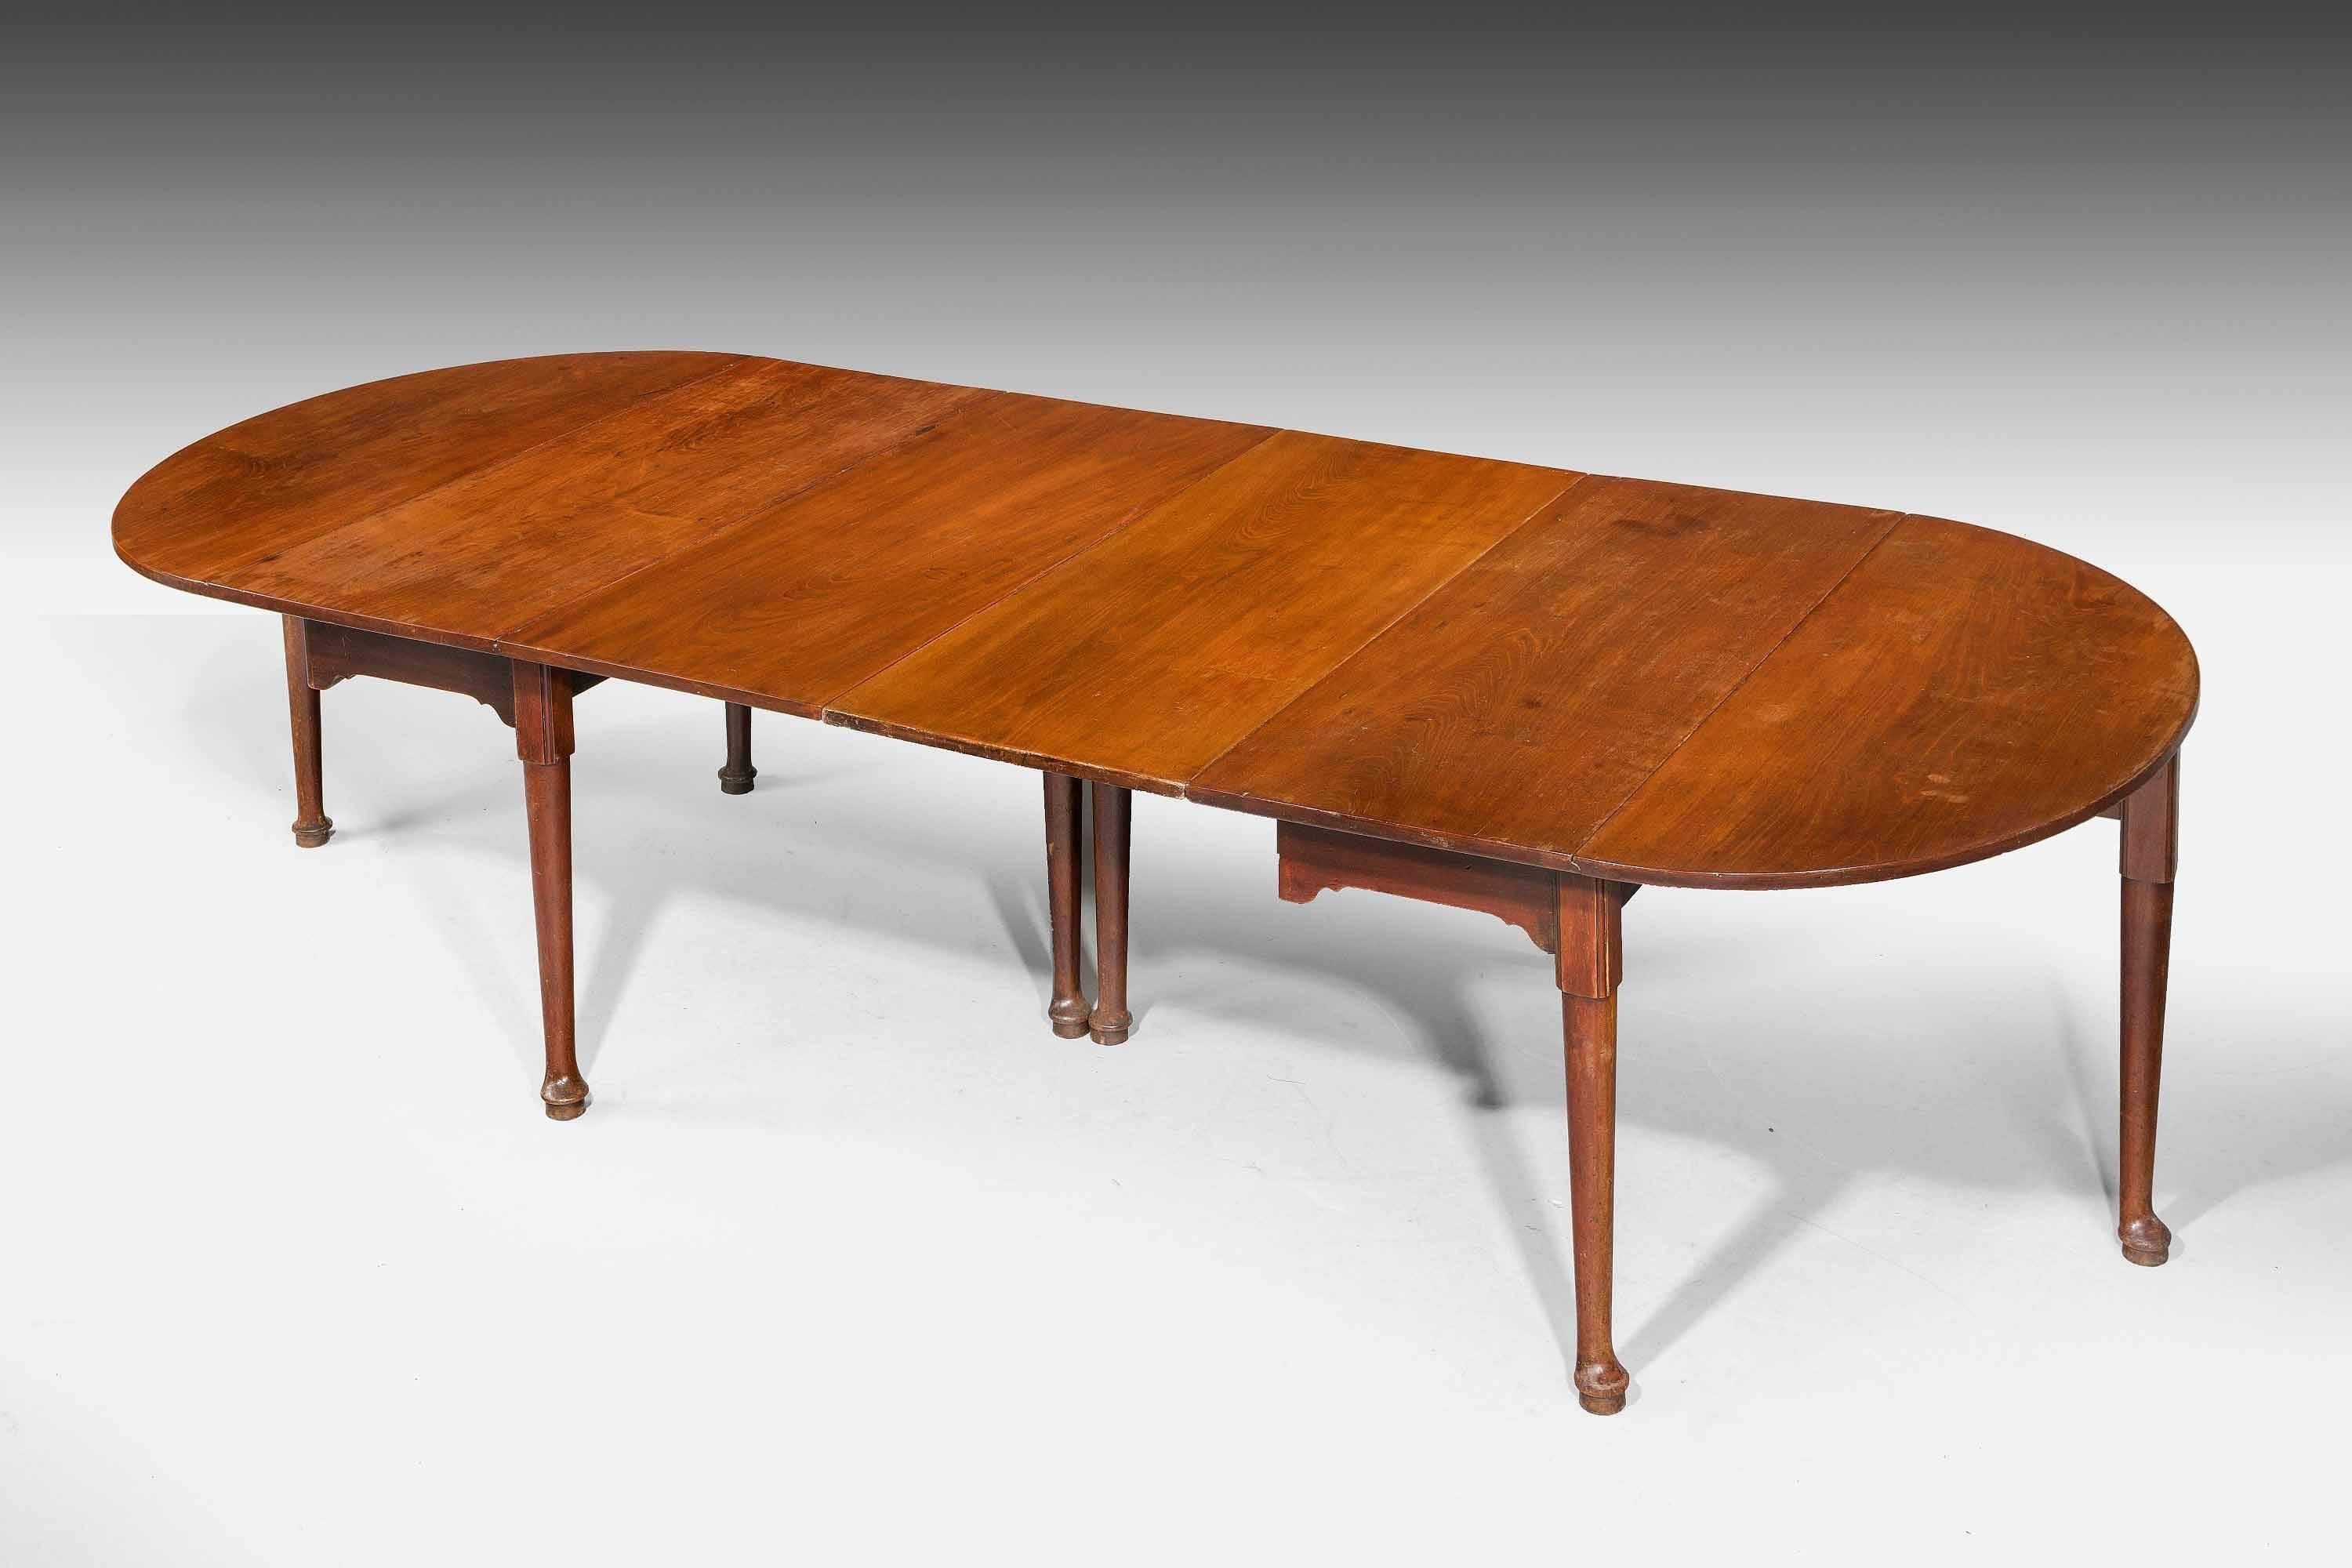 A rare early George III period mahogany dining table, the two end sections with removable leafs. demilune ends, the supports of gentle cabriole form terminating in pad feet. The timbers are beautifully figured and all are in their original